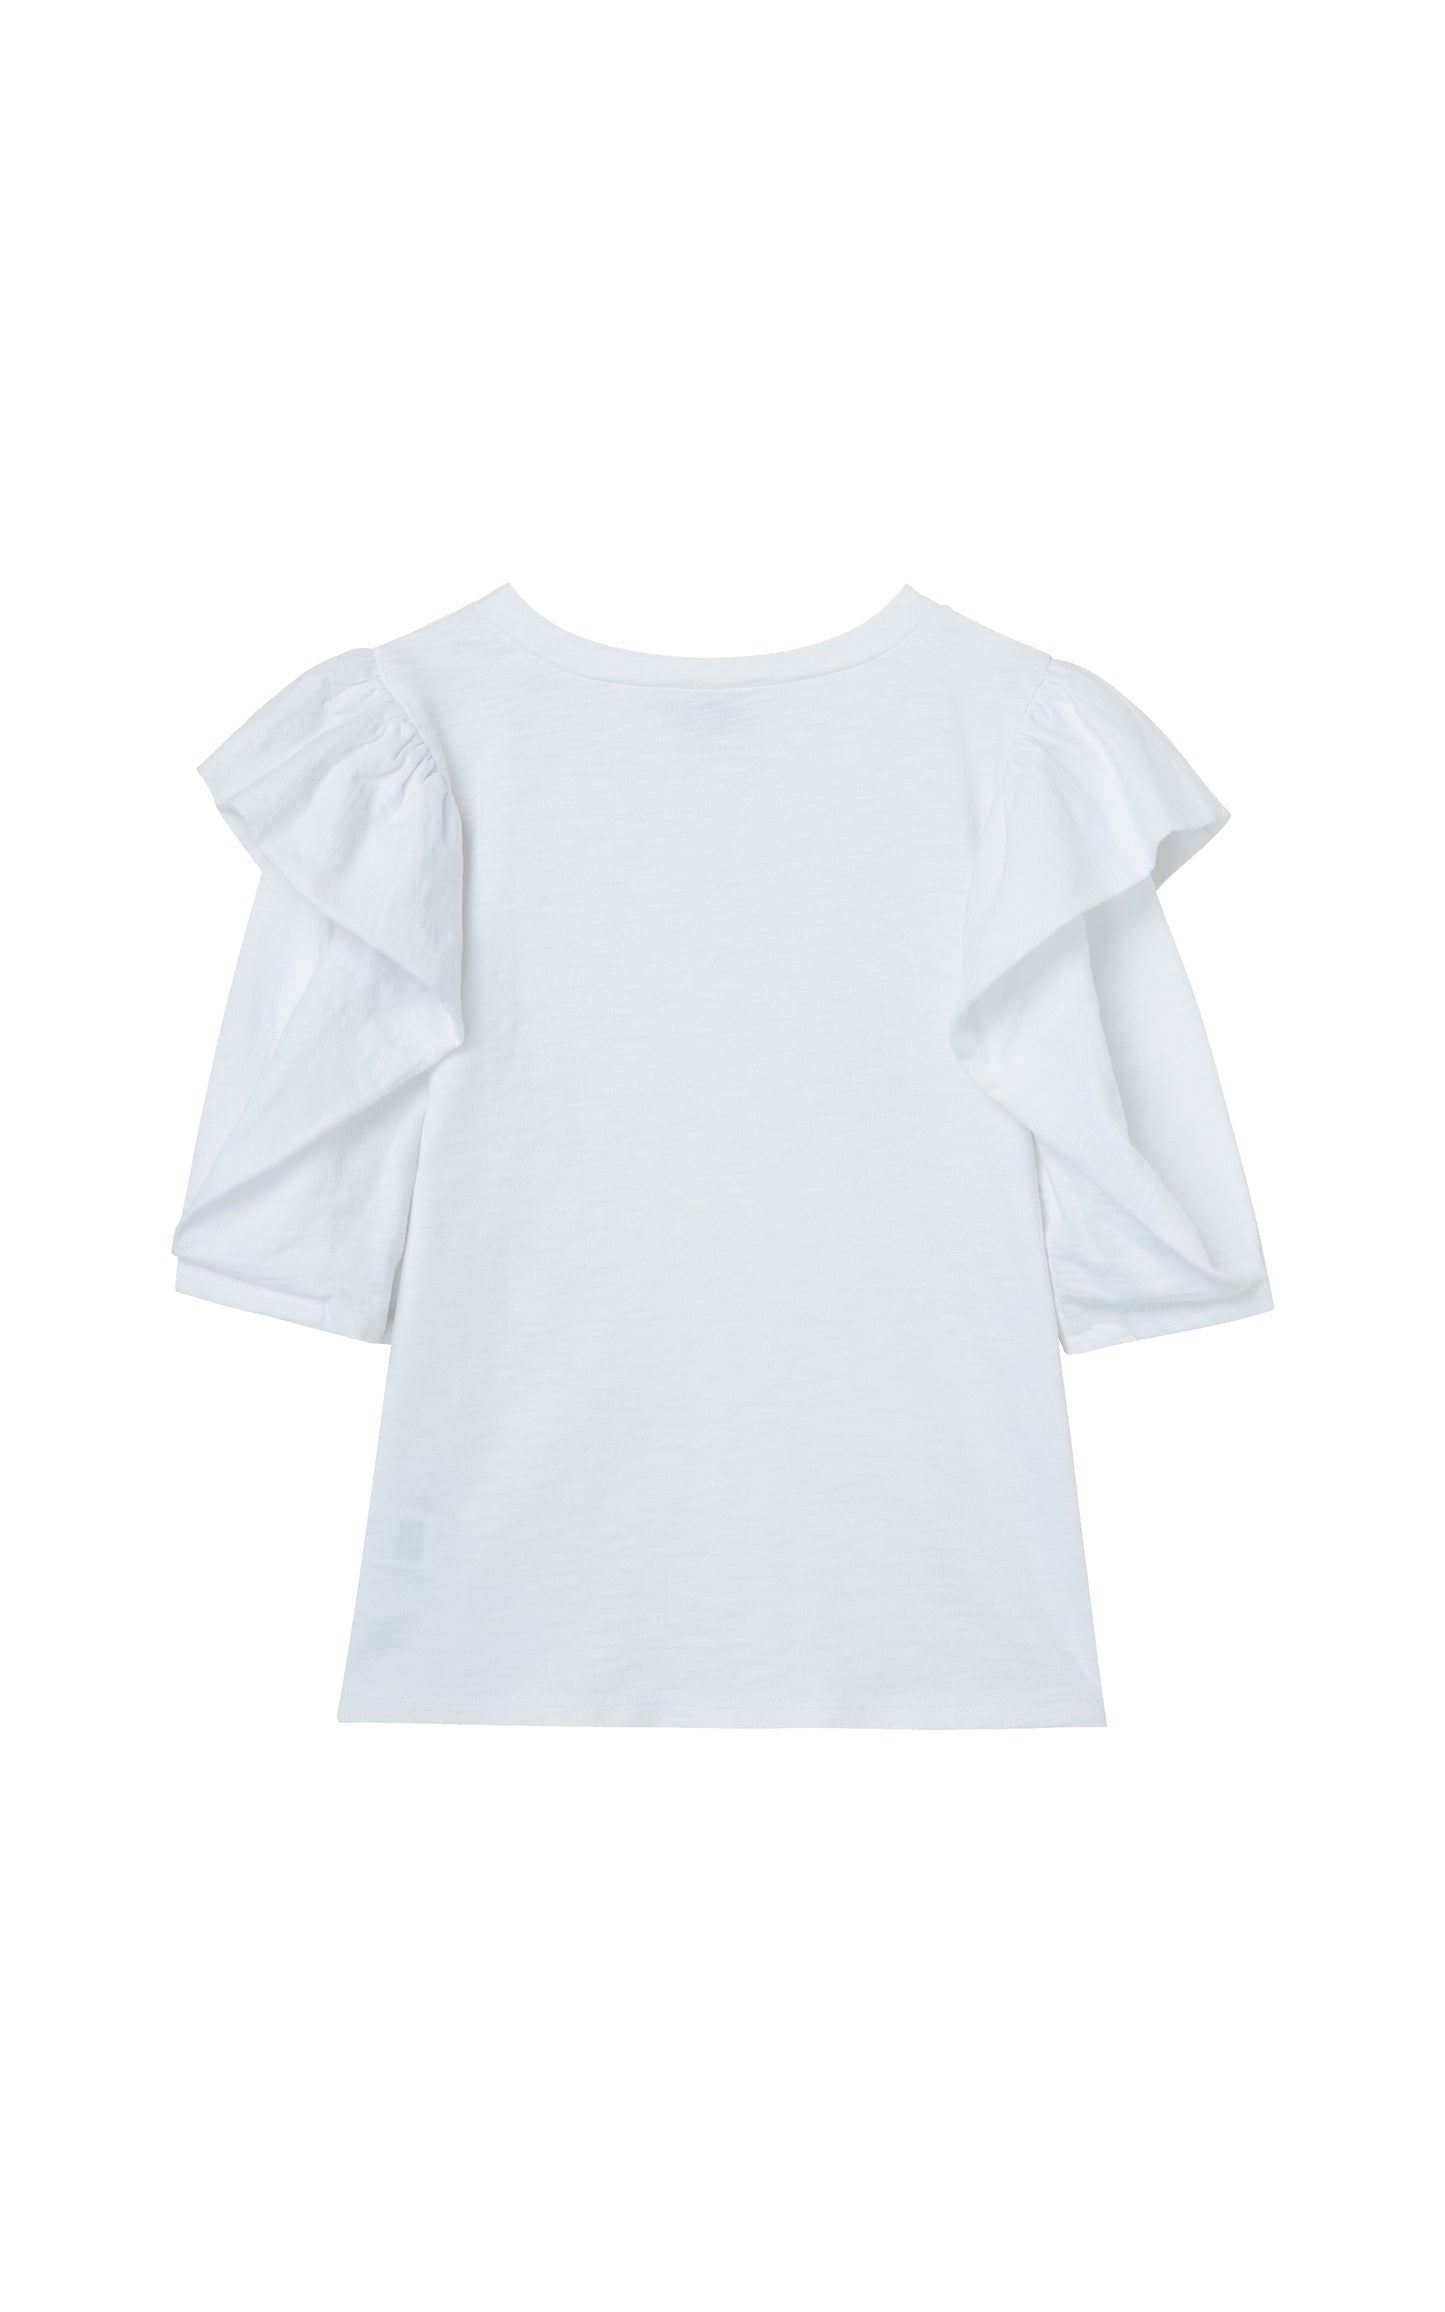 Back View White  Top with Large sleeve ruffle 